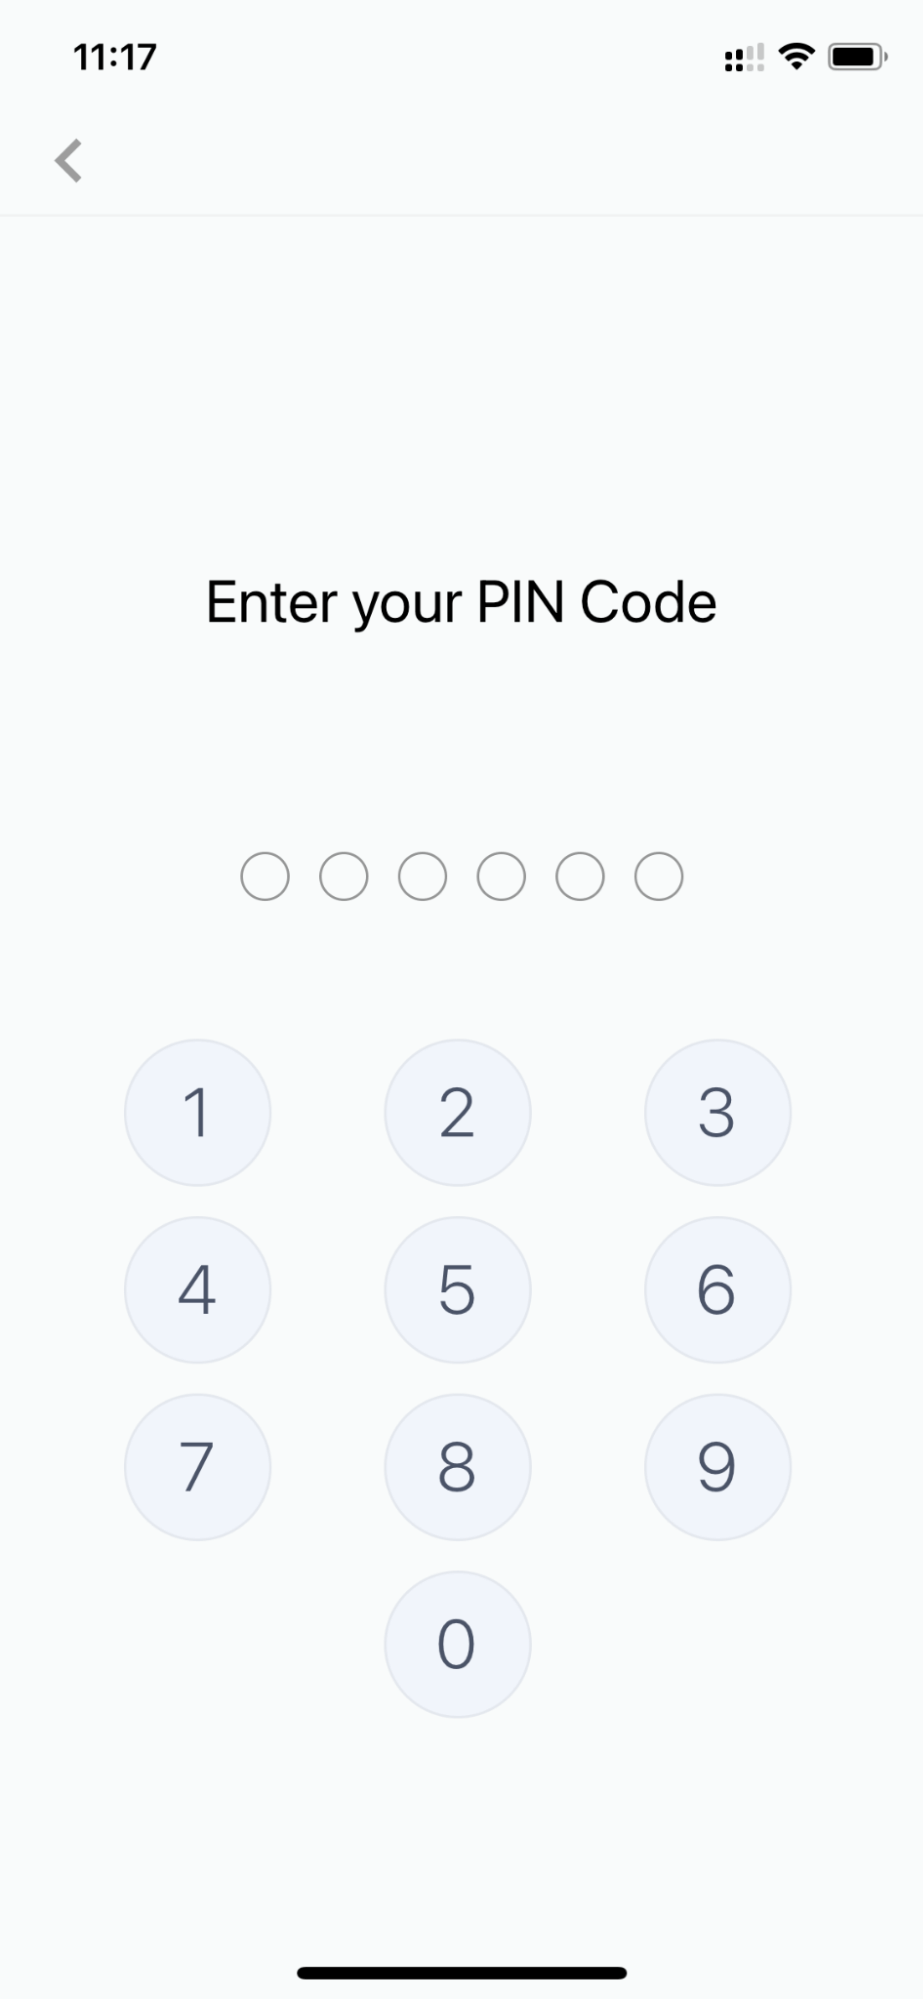 Entering the PIN code